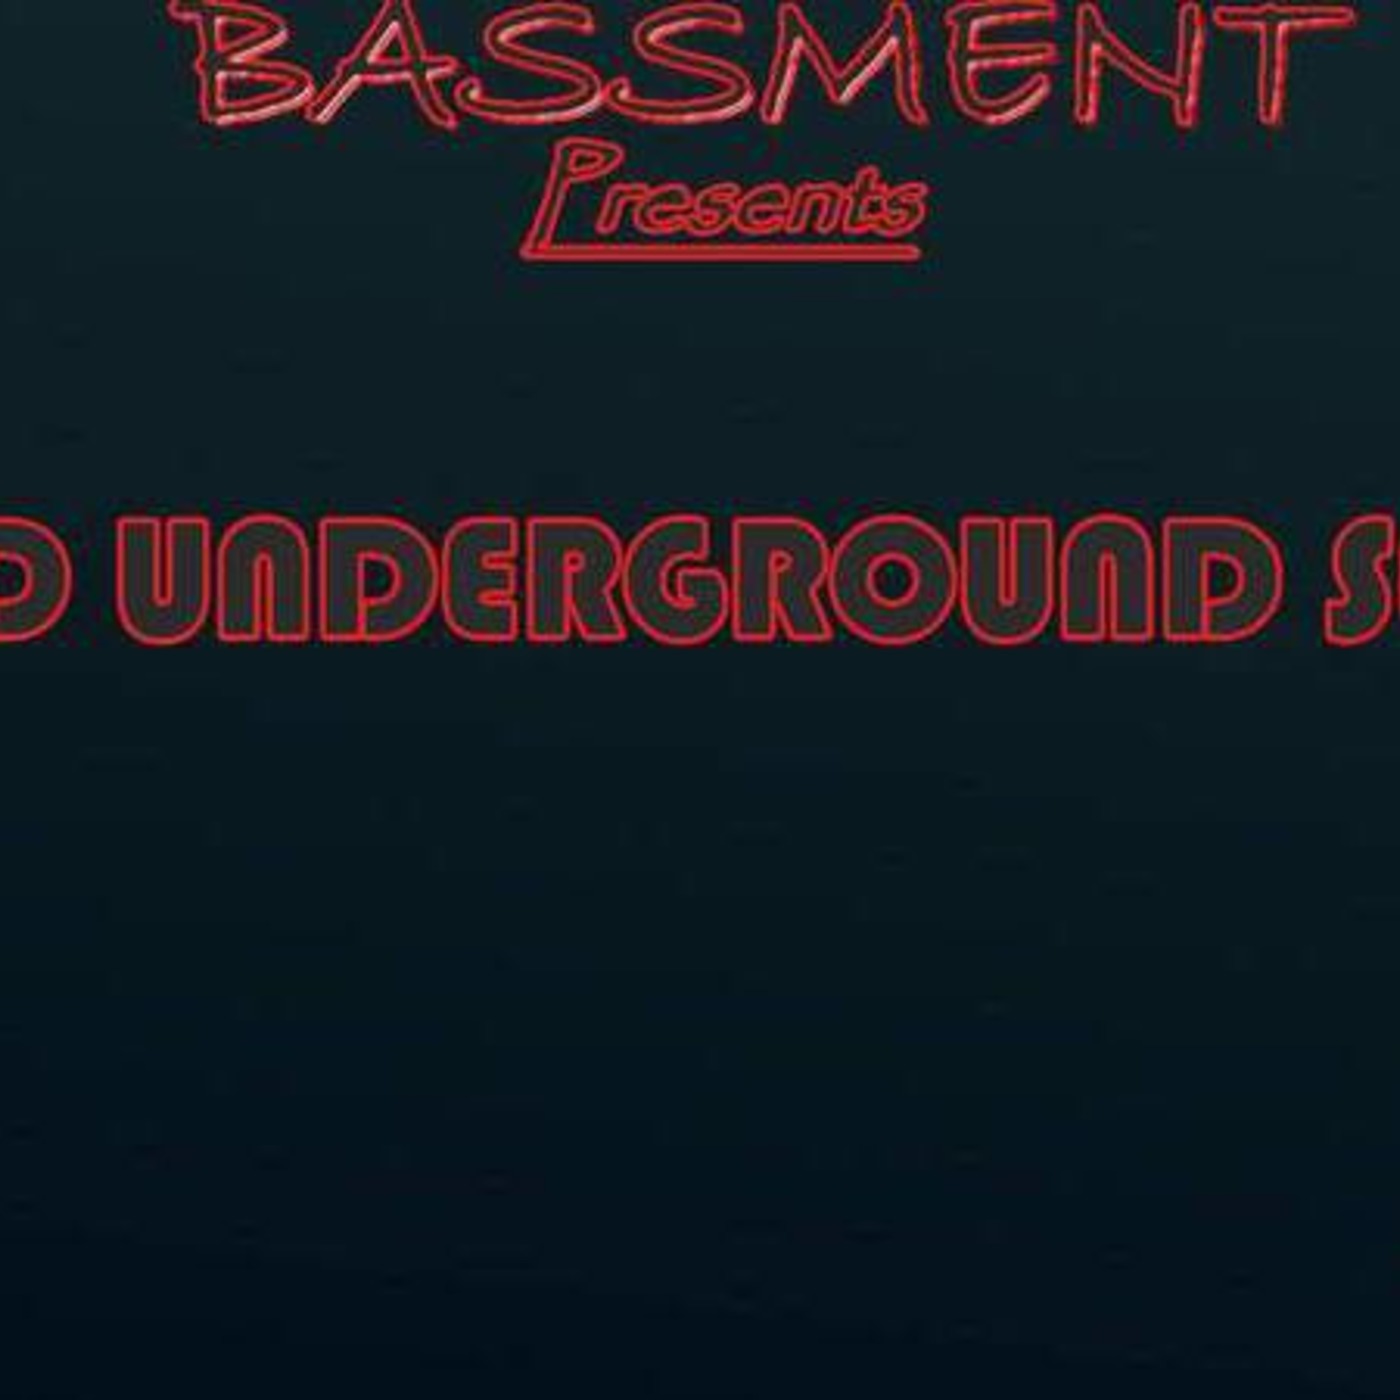 Solid Underground Sessions